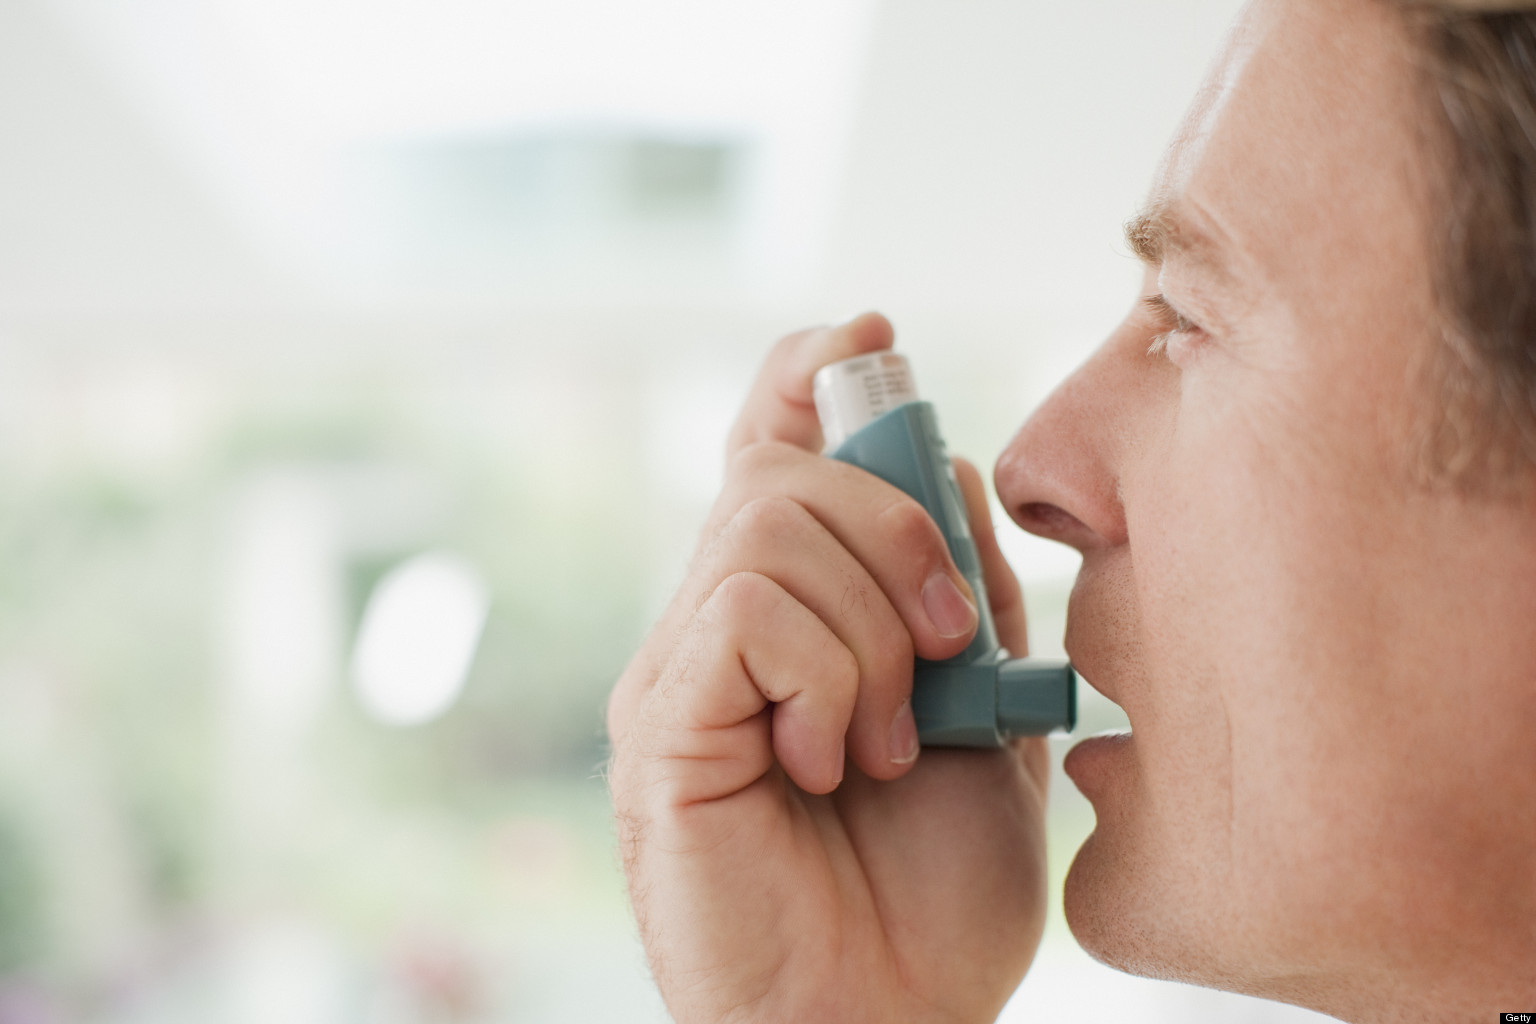 Asthma patients are mandated to have inhalers with them at all time